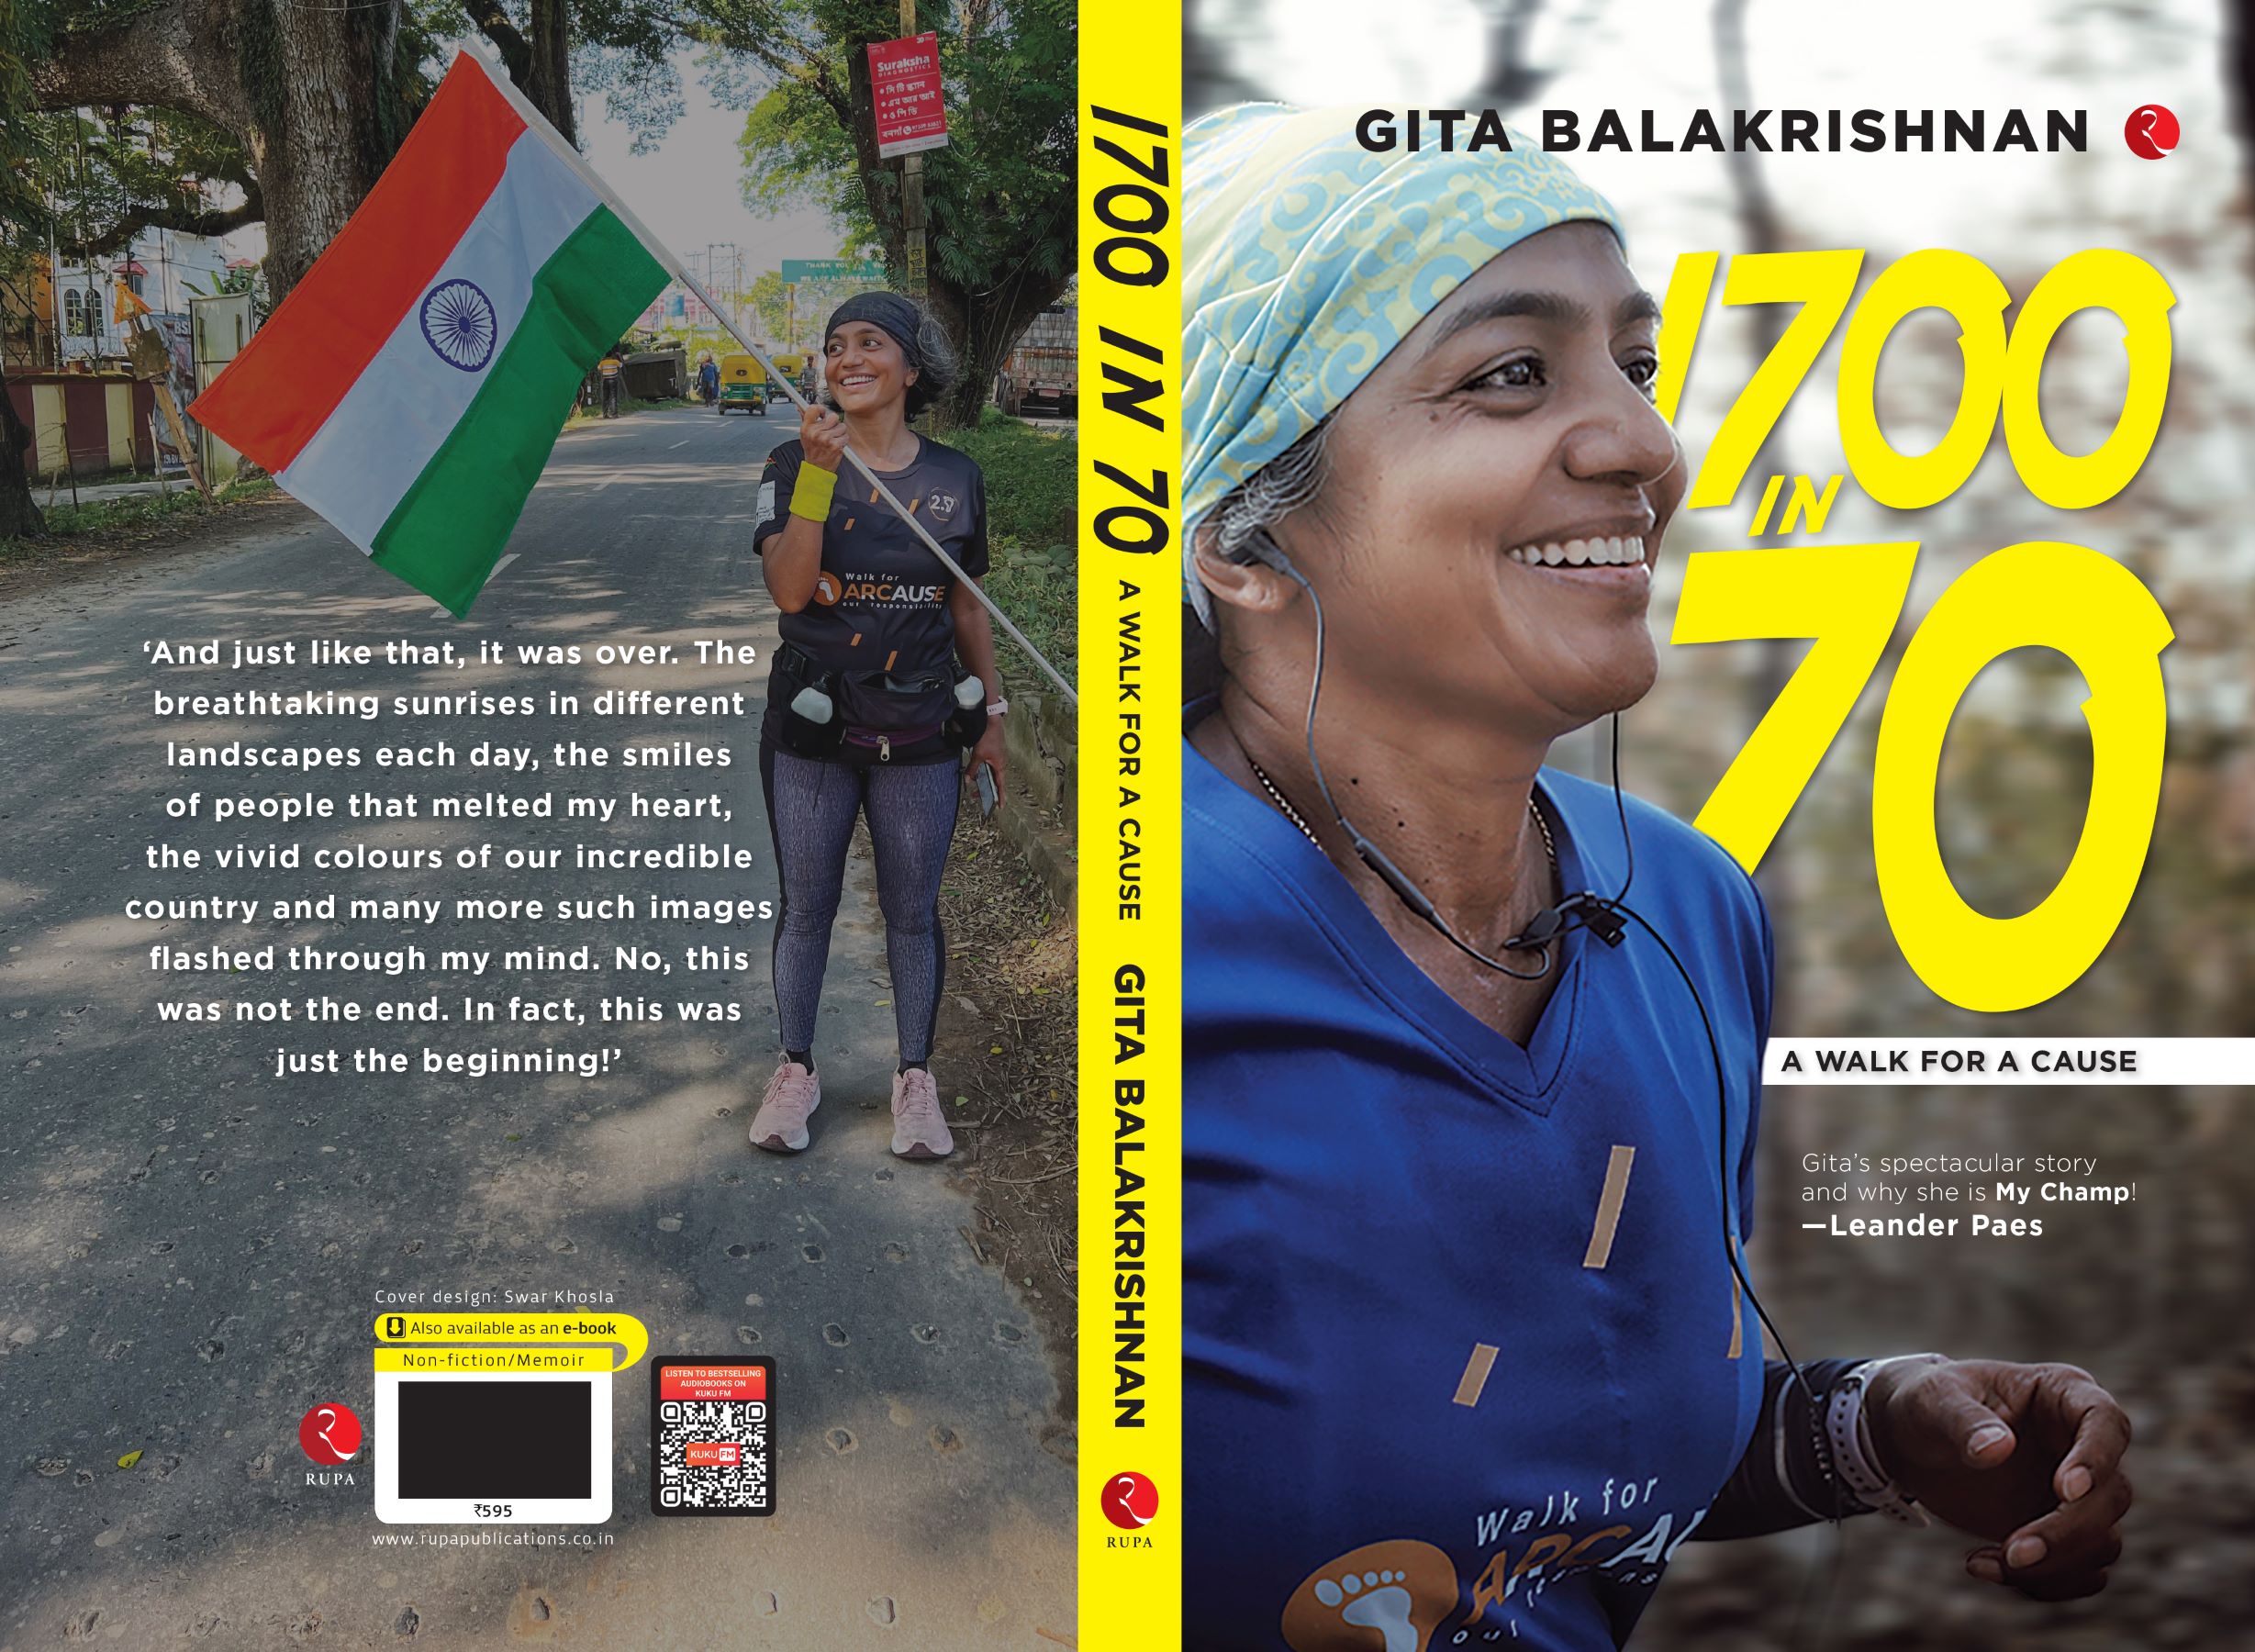 Cover Page, 1700 in 70: A Walk for a Cause, by Gita Balakrishnan